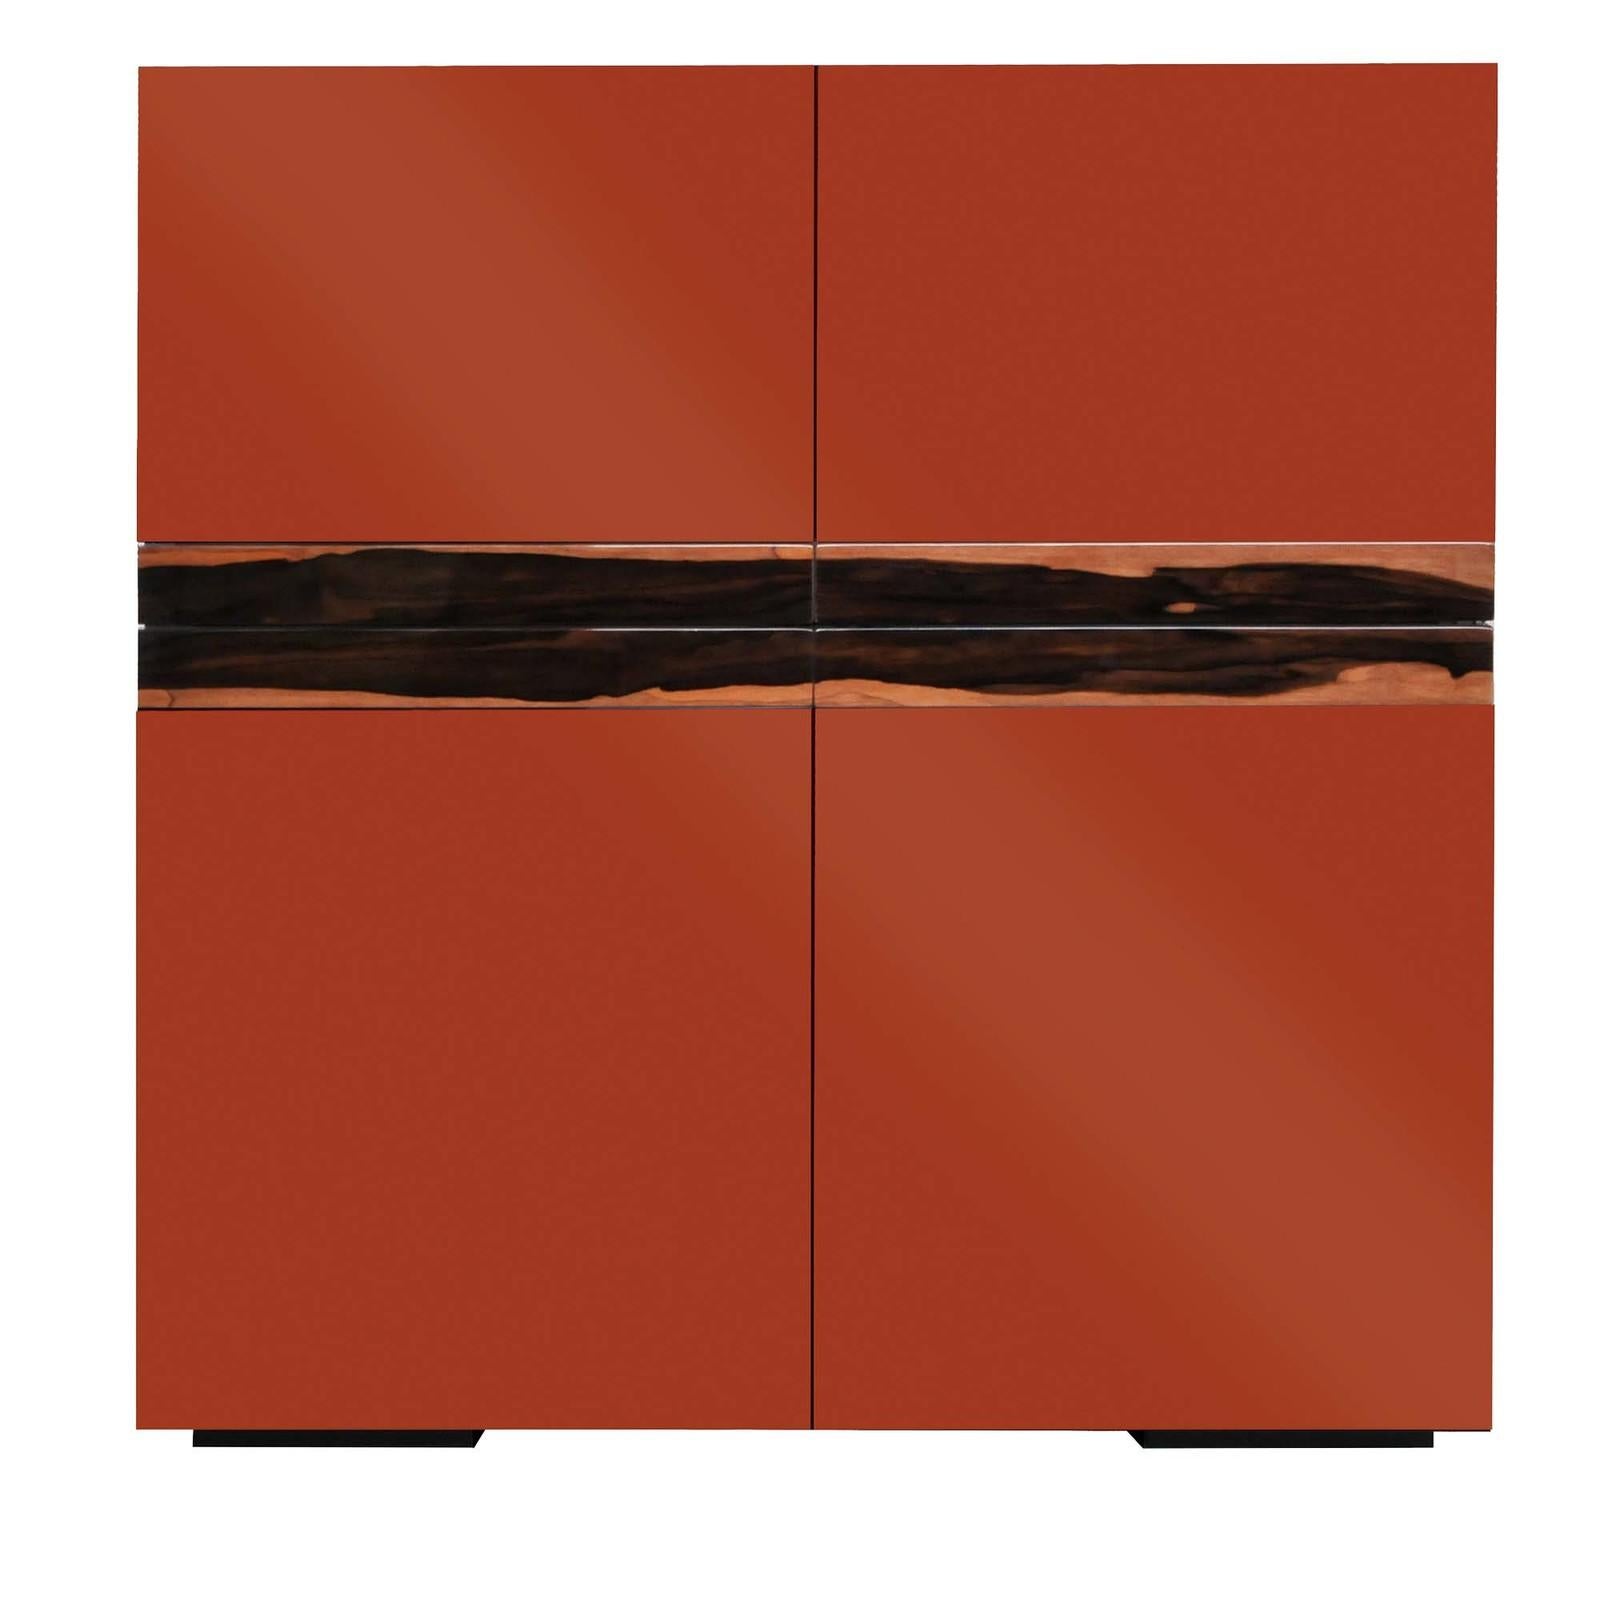 A statement piece in any dining or living room, this bar cabinet combines bold colors in a sleek and essential silhouette enhanced by sophisticated details. The glossy red china polyurethane lacquer is complemented by the warm hues of the Macassar